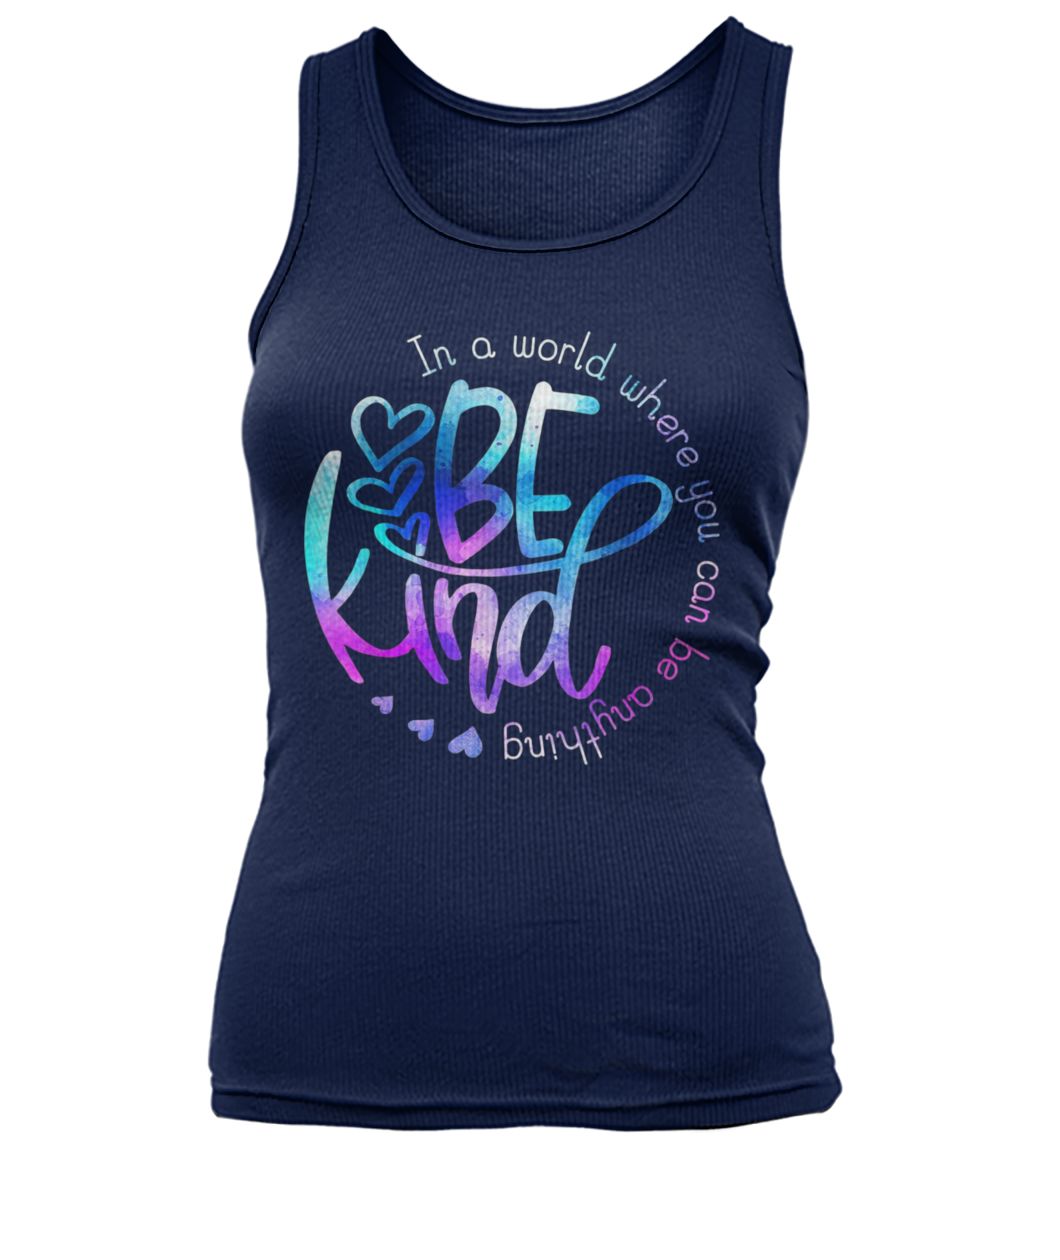 Hippie in a world where you can be anything be kind women's tank top